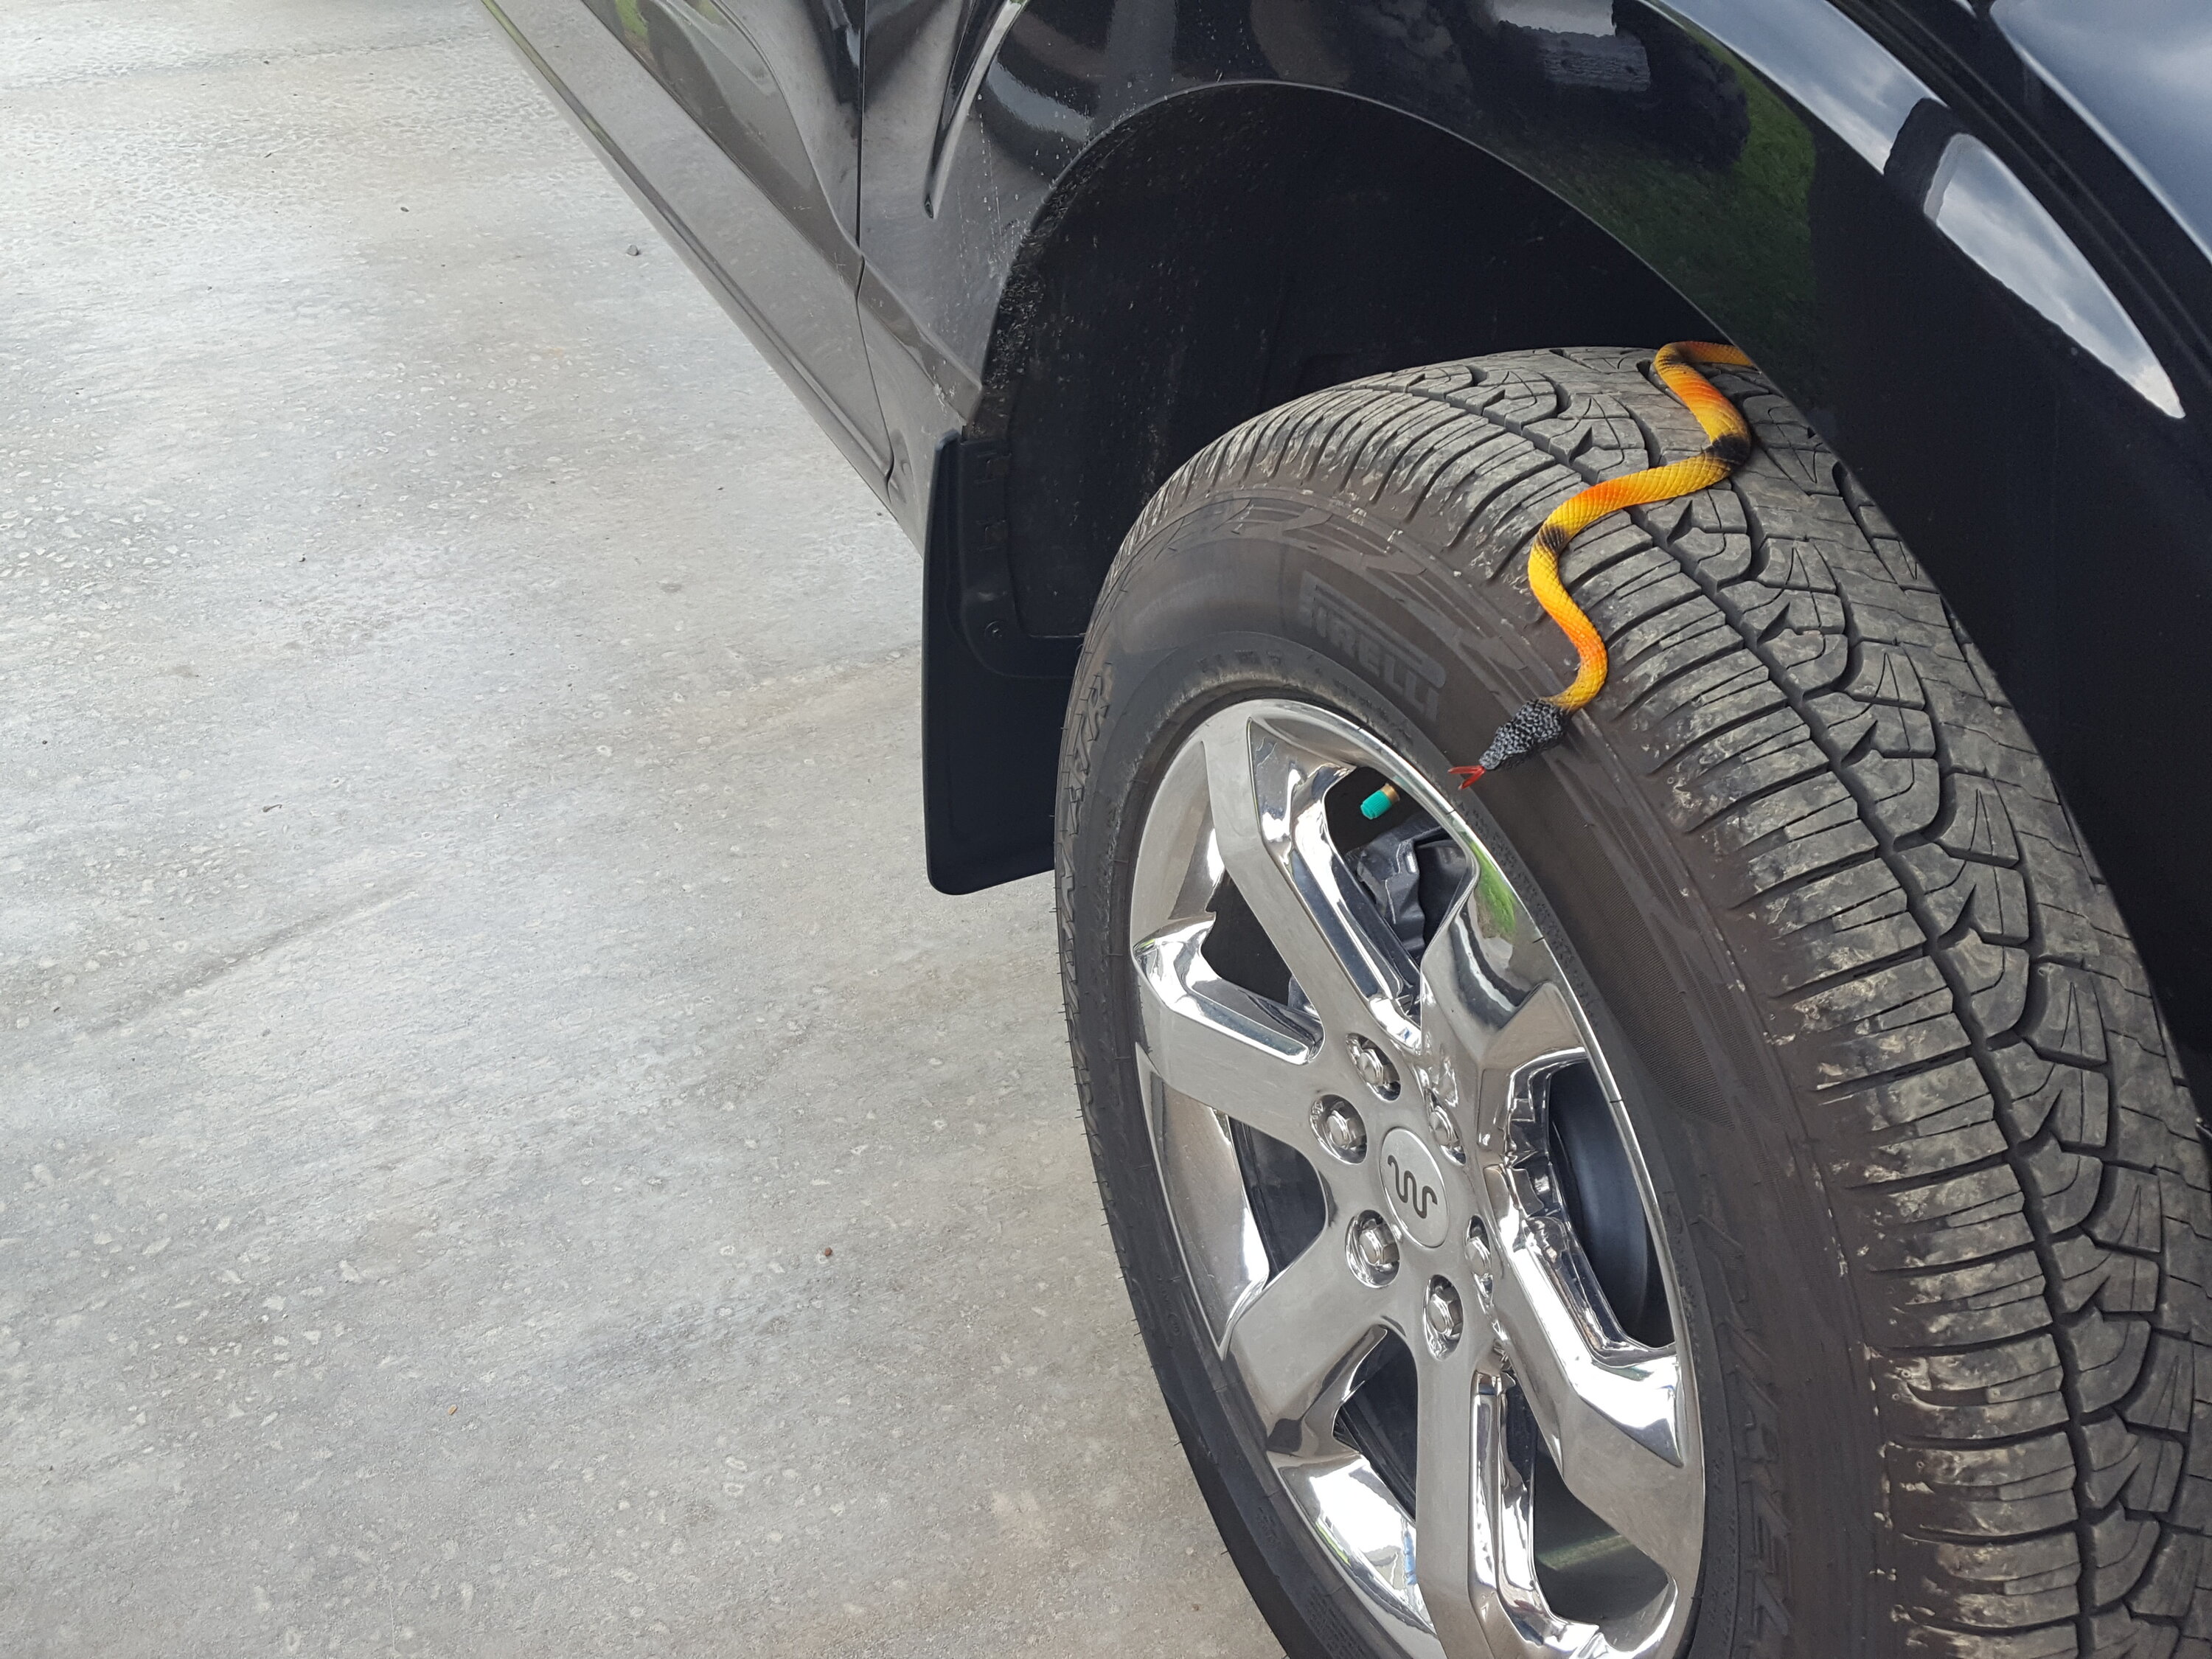 Ford F-150 Stock Hankook tires on FX4 for forest roads wheel liners splash guards (7)